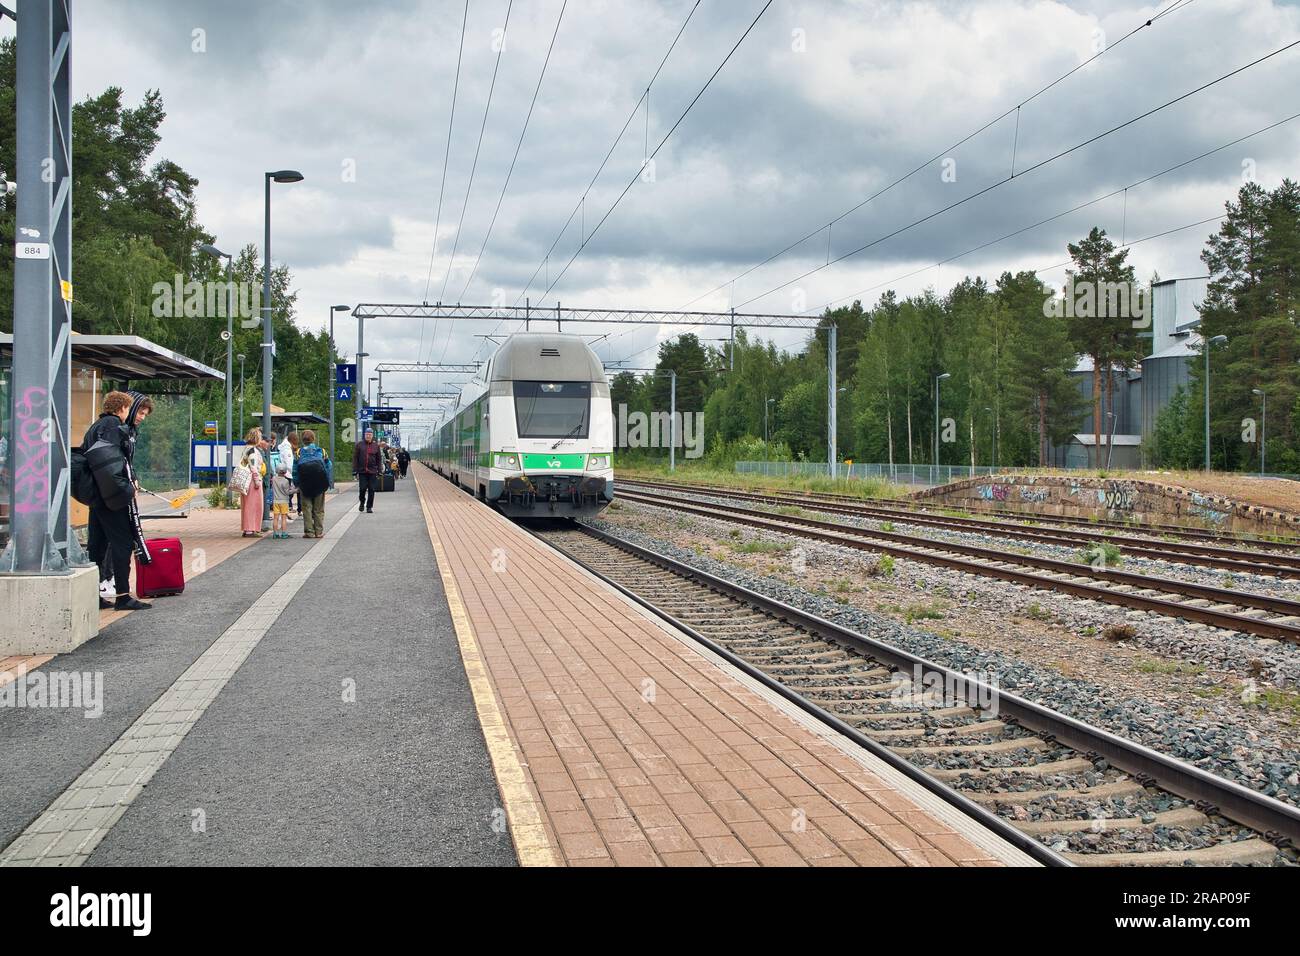 Intercity train arriving at the Kempele railway station, Finland Stock Photo